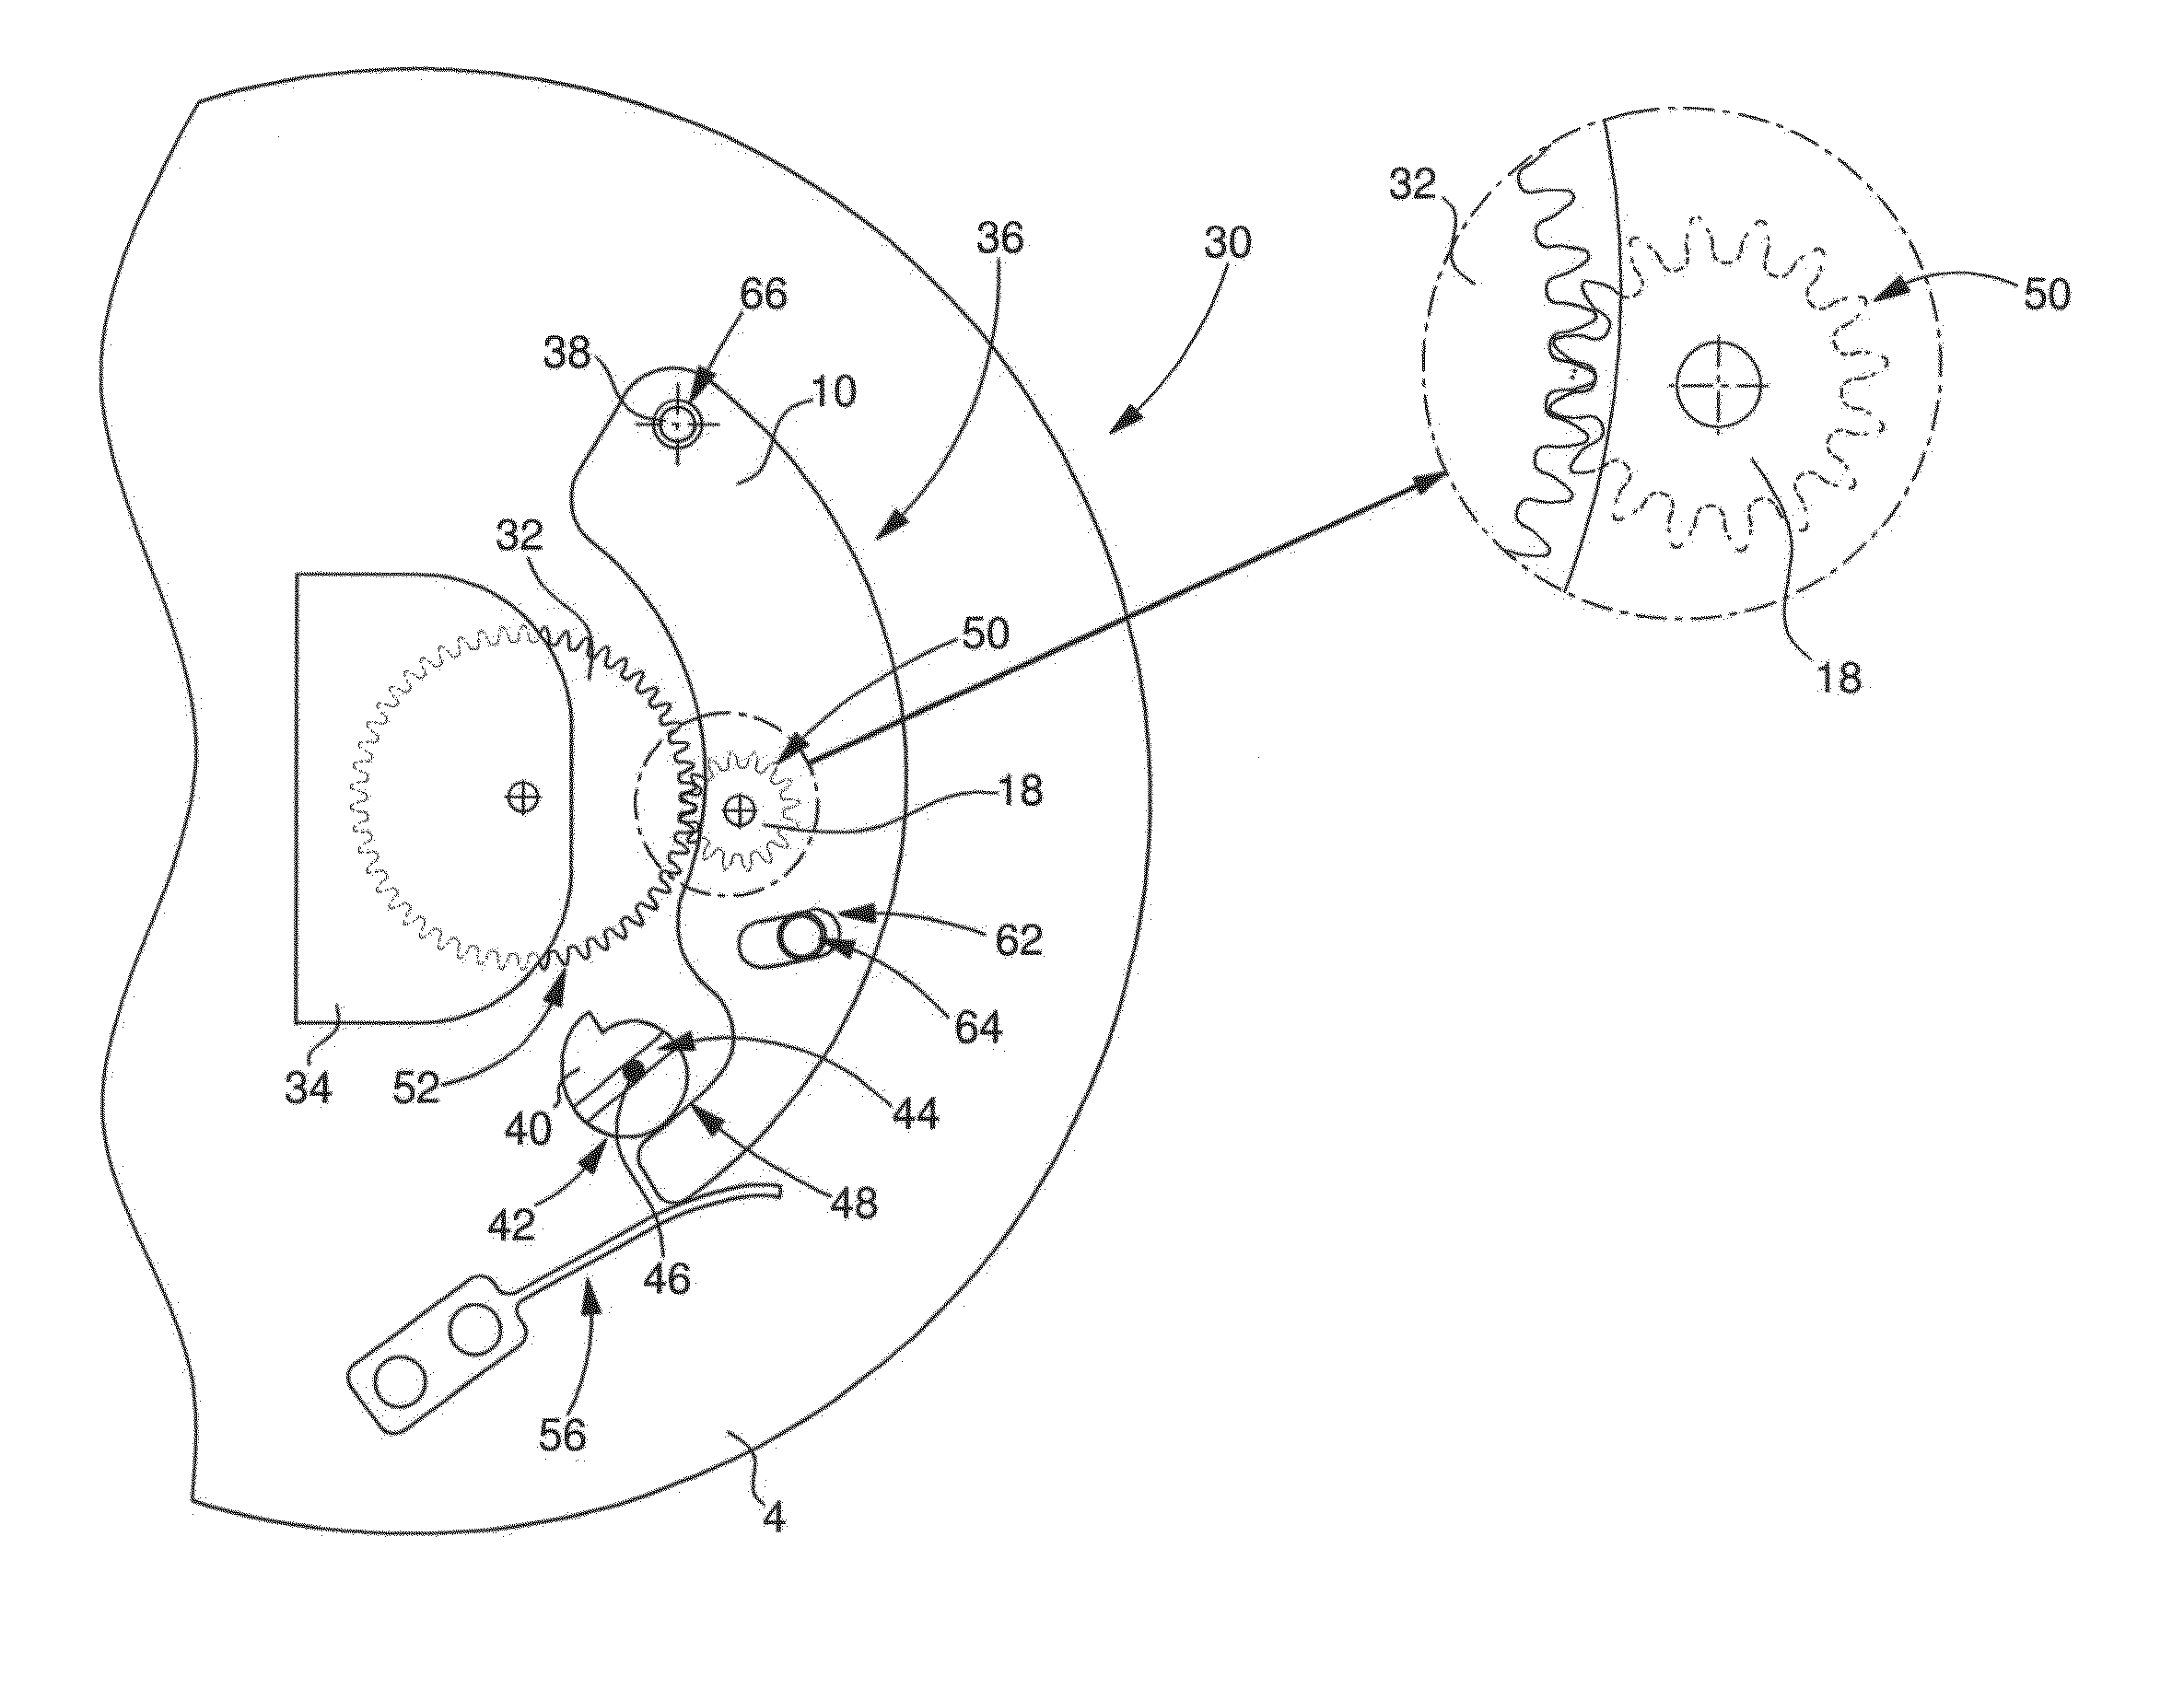 Timepiece movement comprising a module fitted with a wheel set meshing with another wheel set pivoting in a base on which the module is mounted